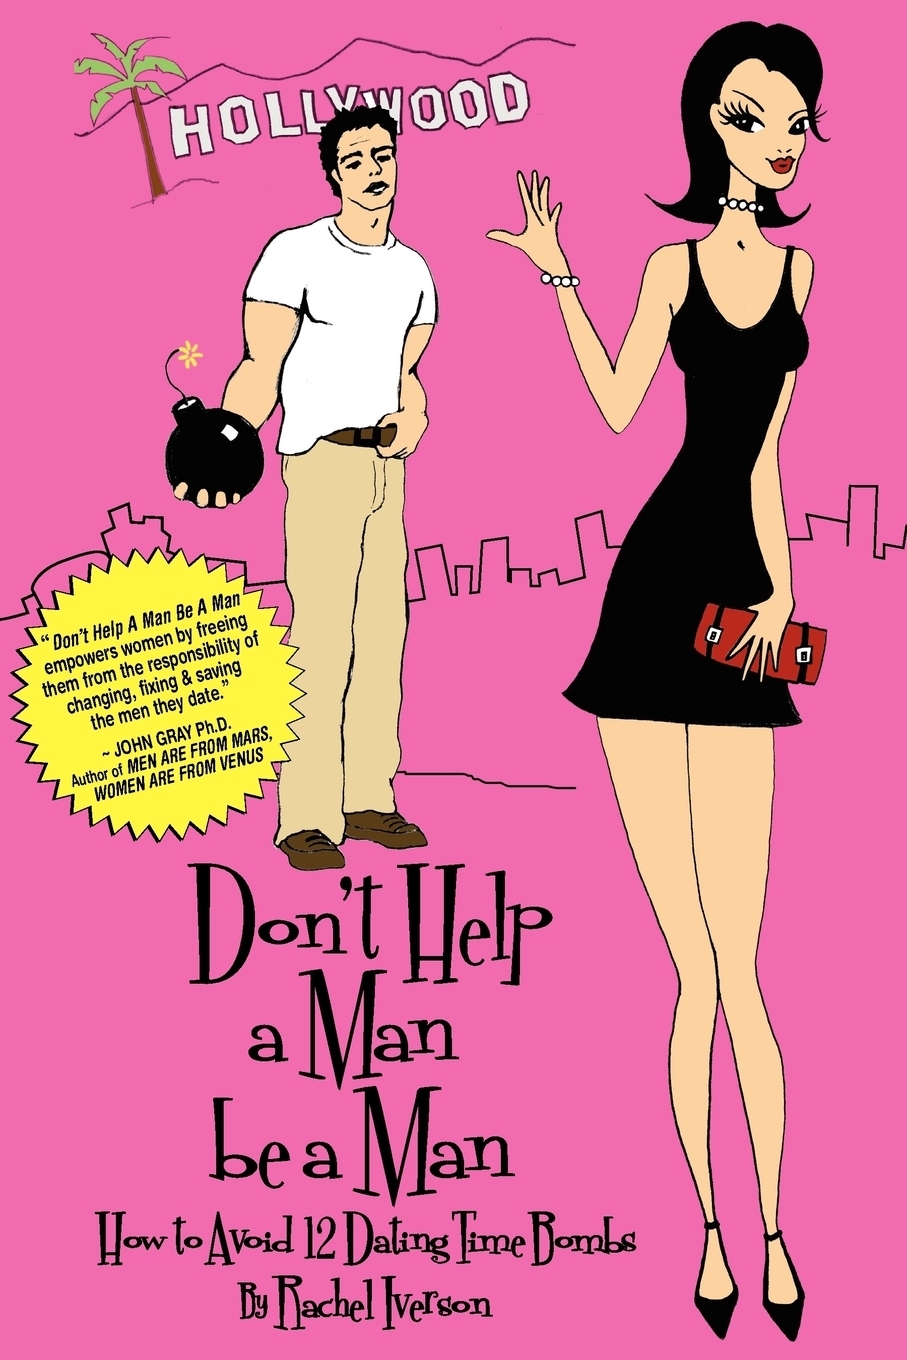 Never man to be. How to be a man книга. Be a man.